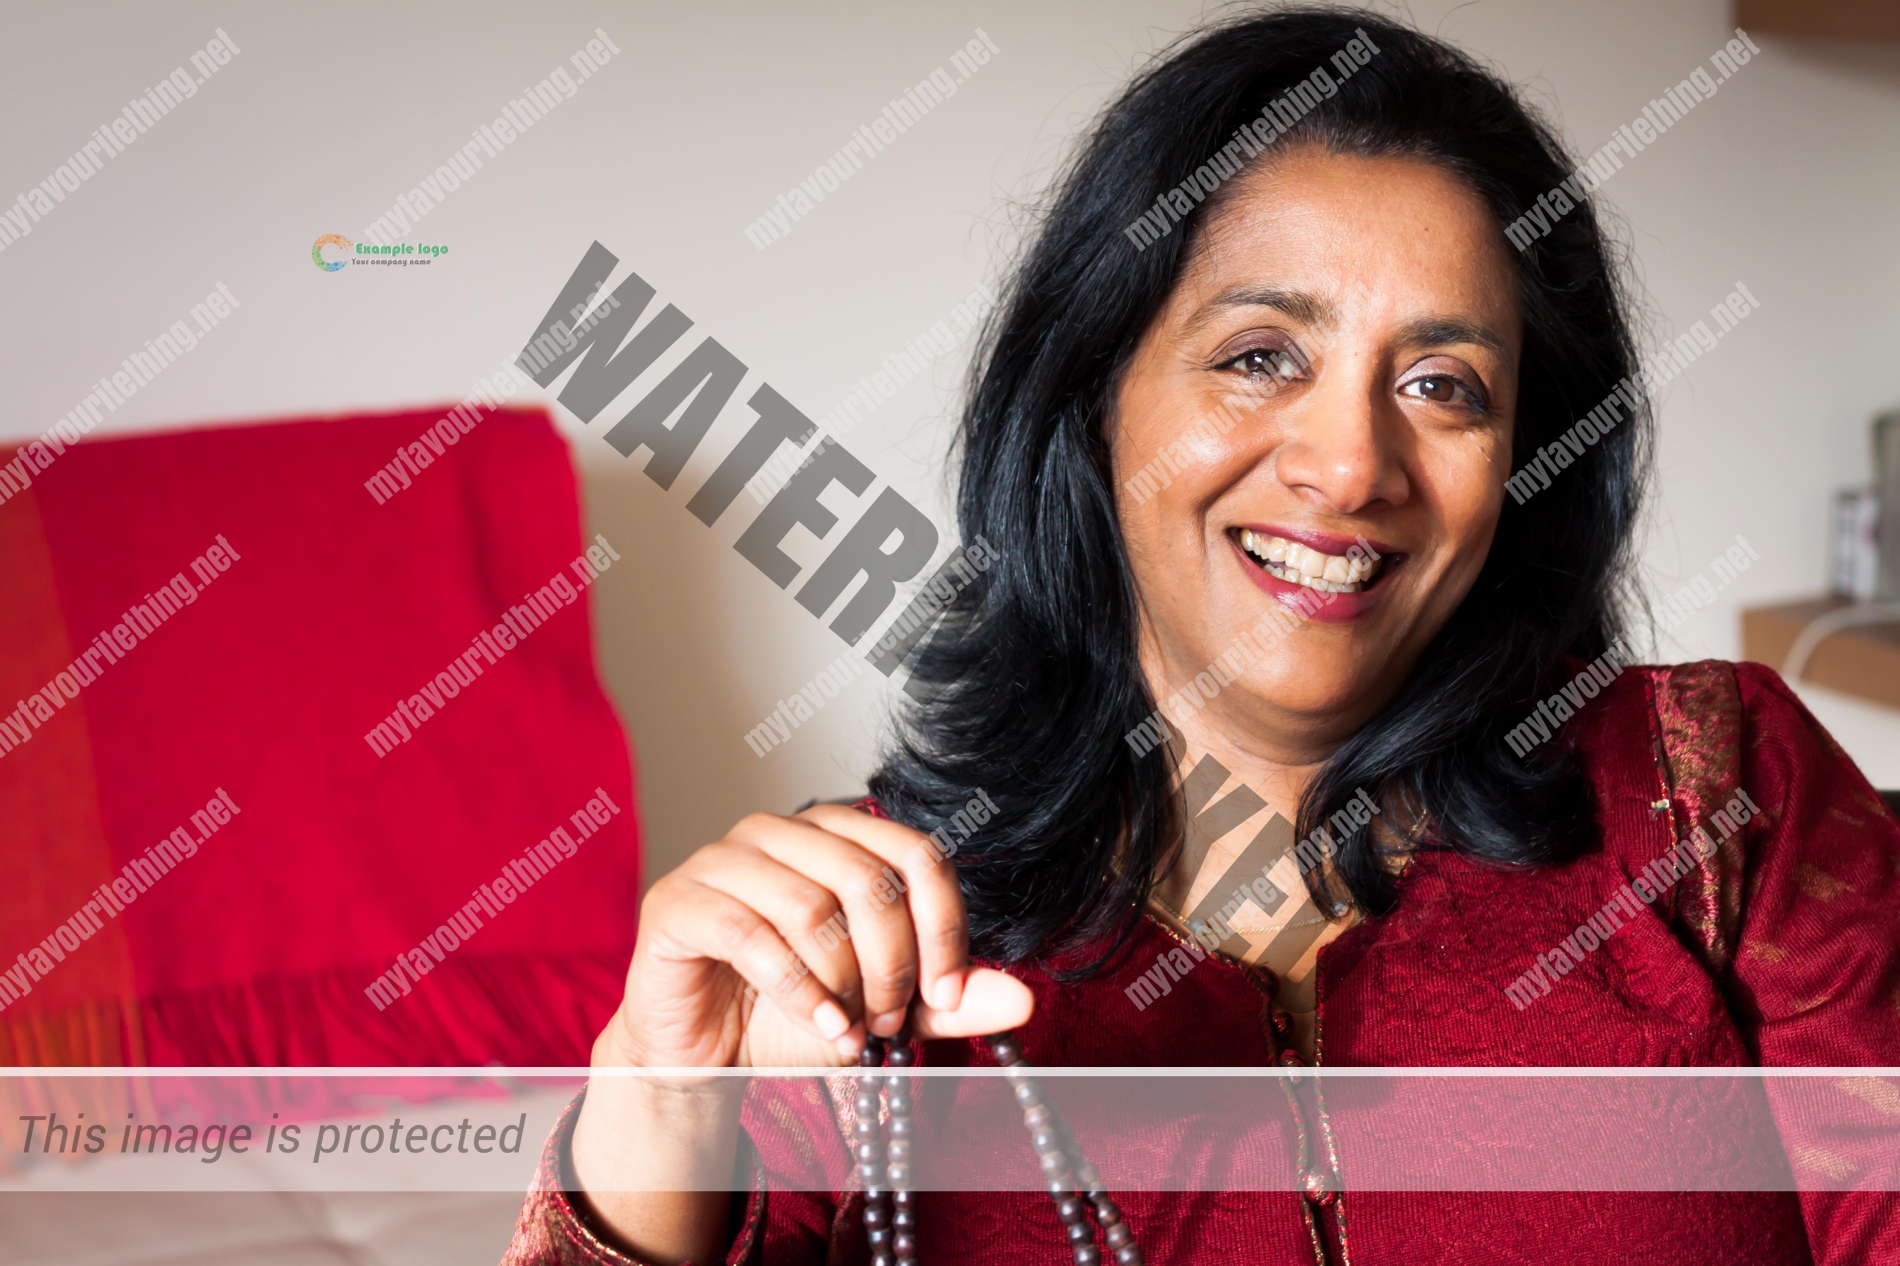 Author Sunny Singh with Grandmother's prayer beads